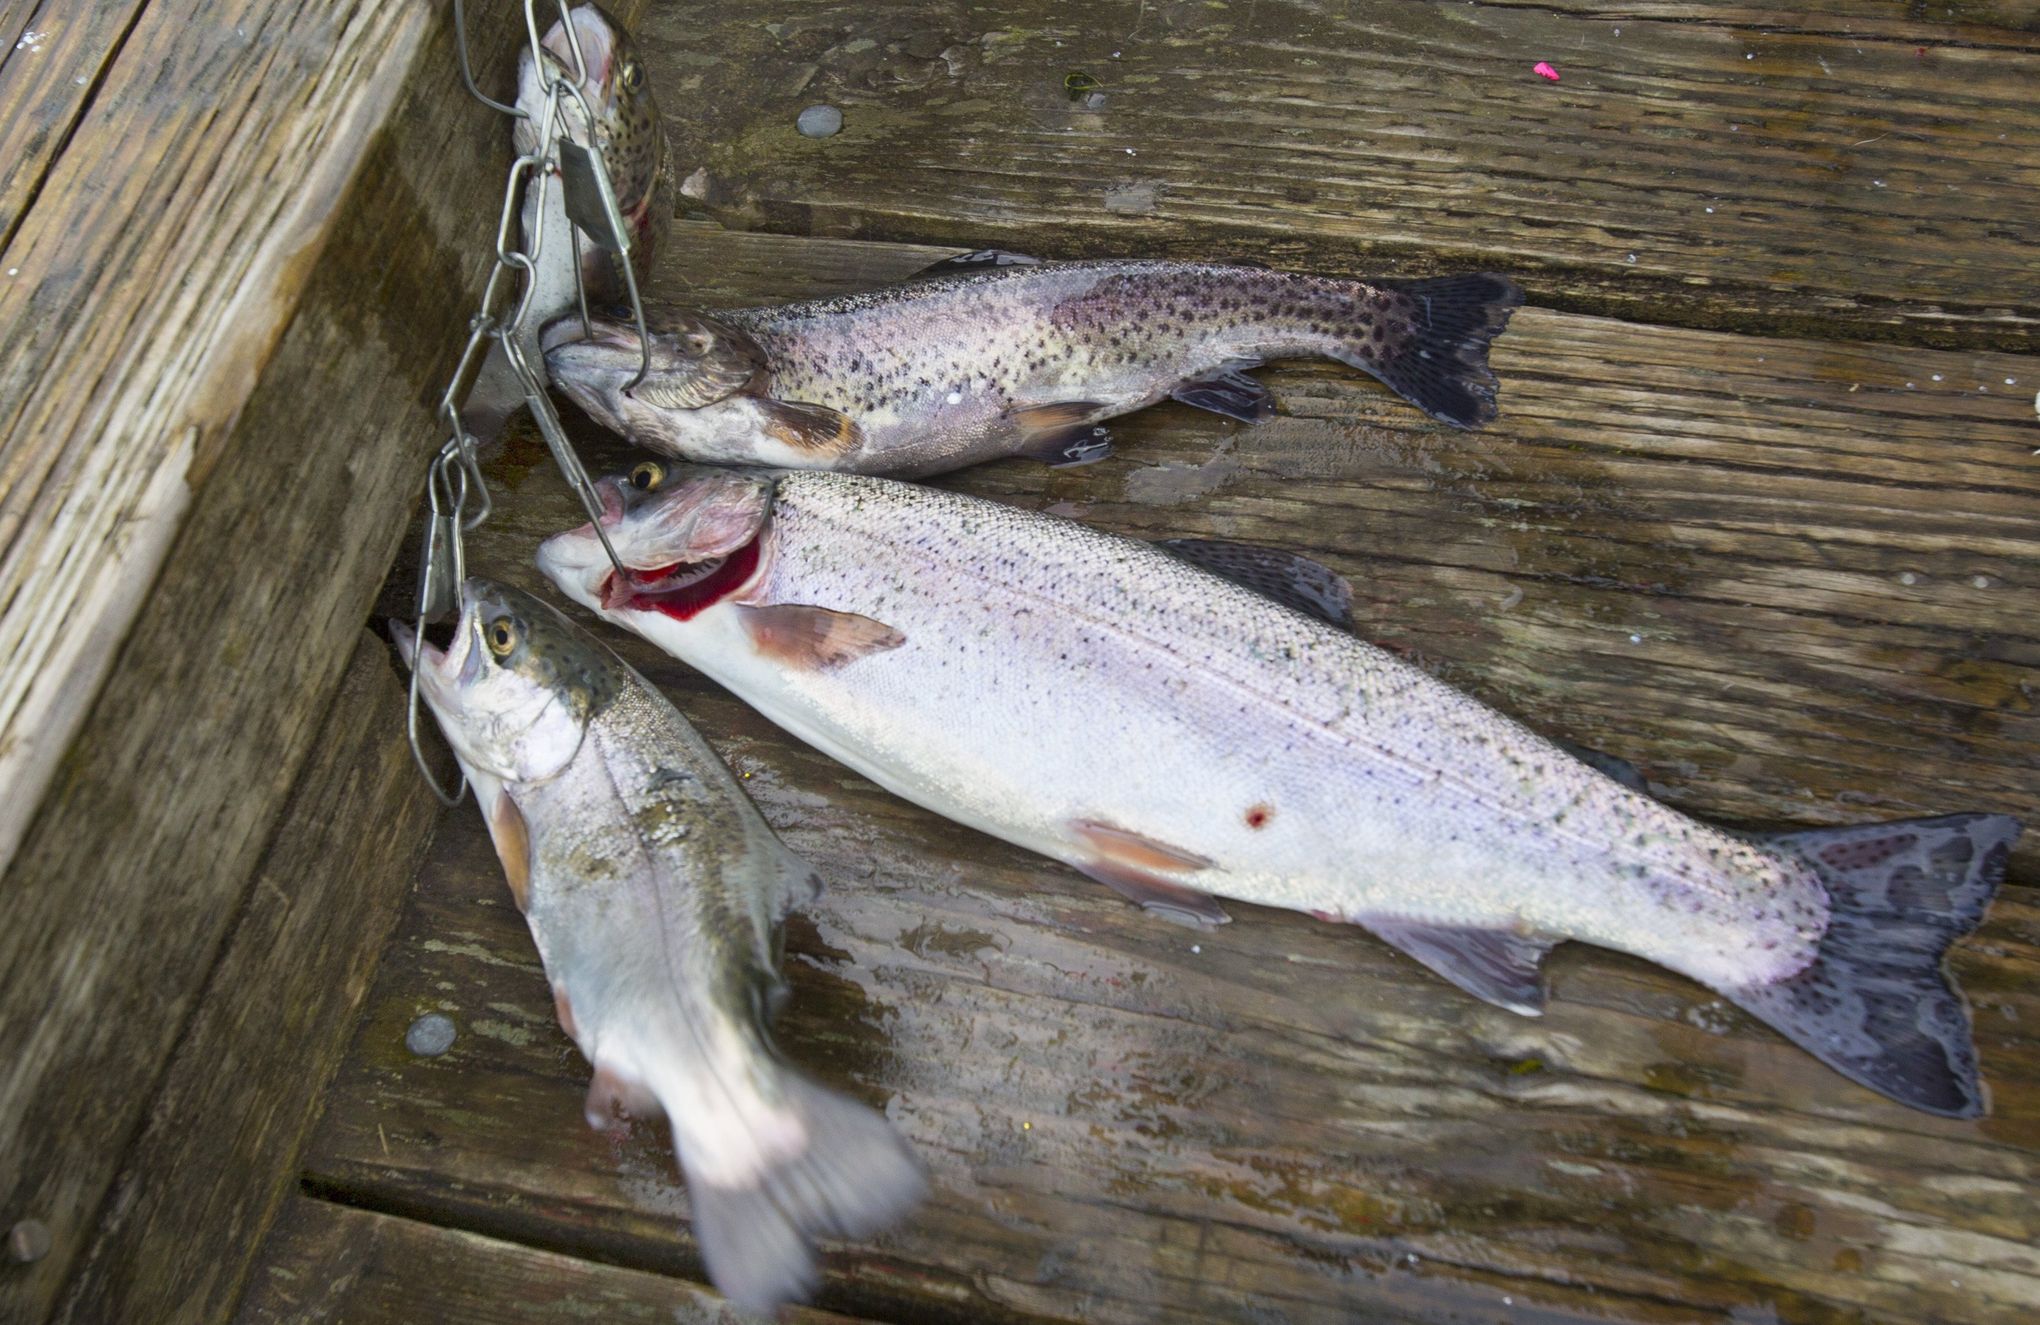 More lakes planted with trout to boost early spring fishing